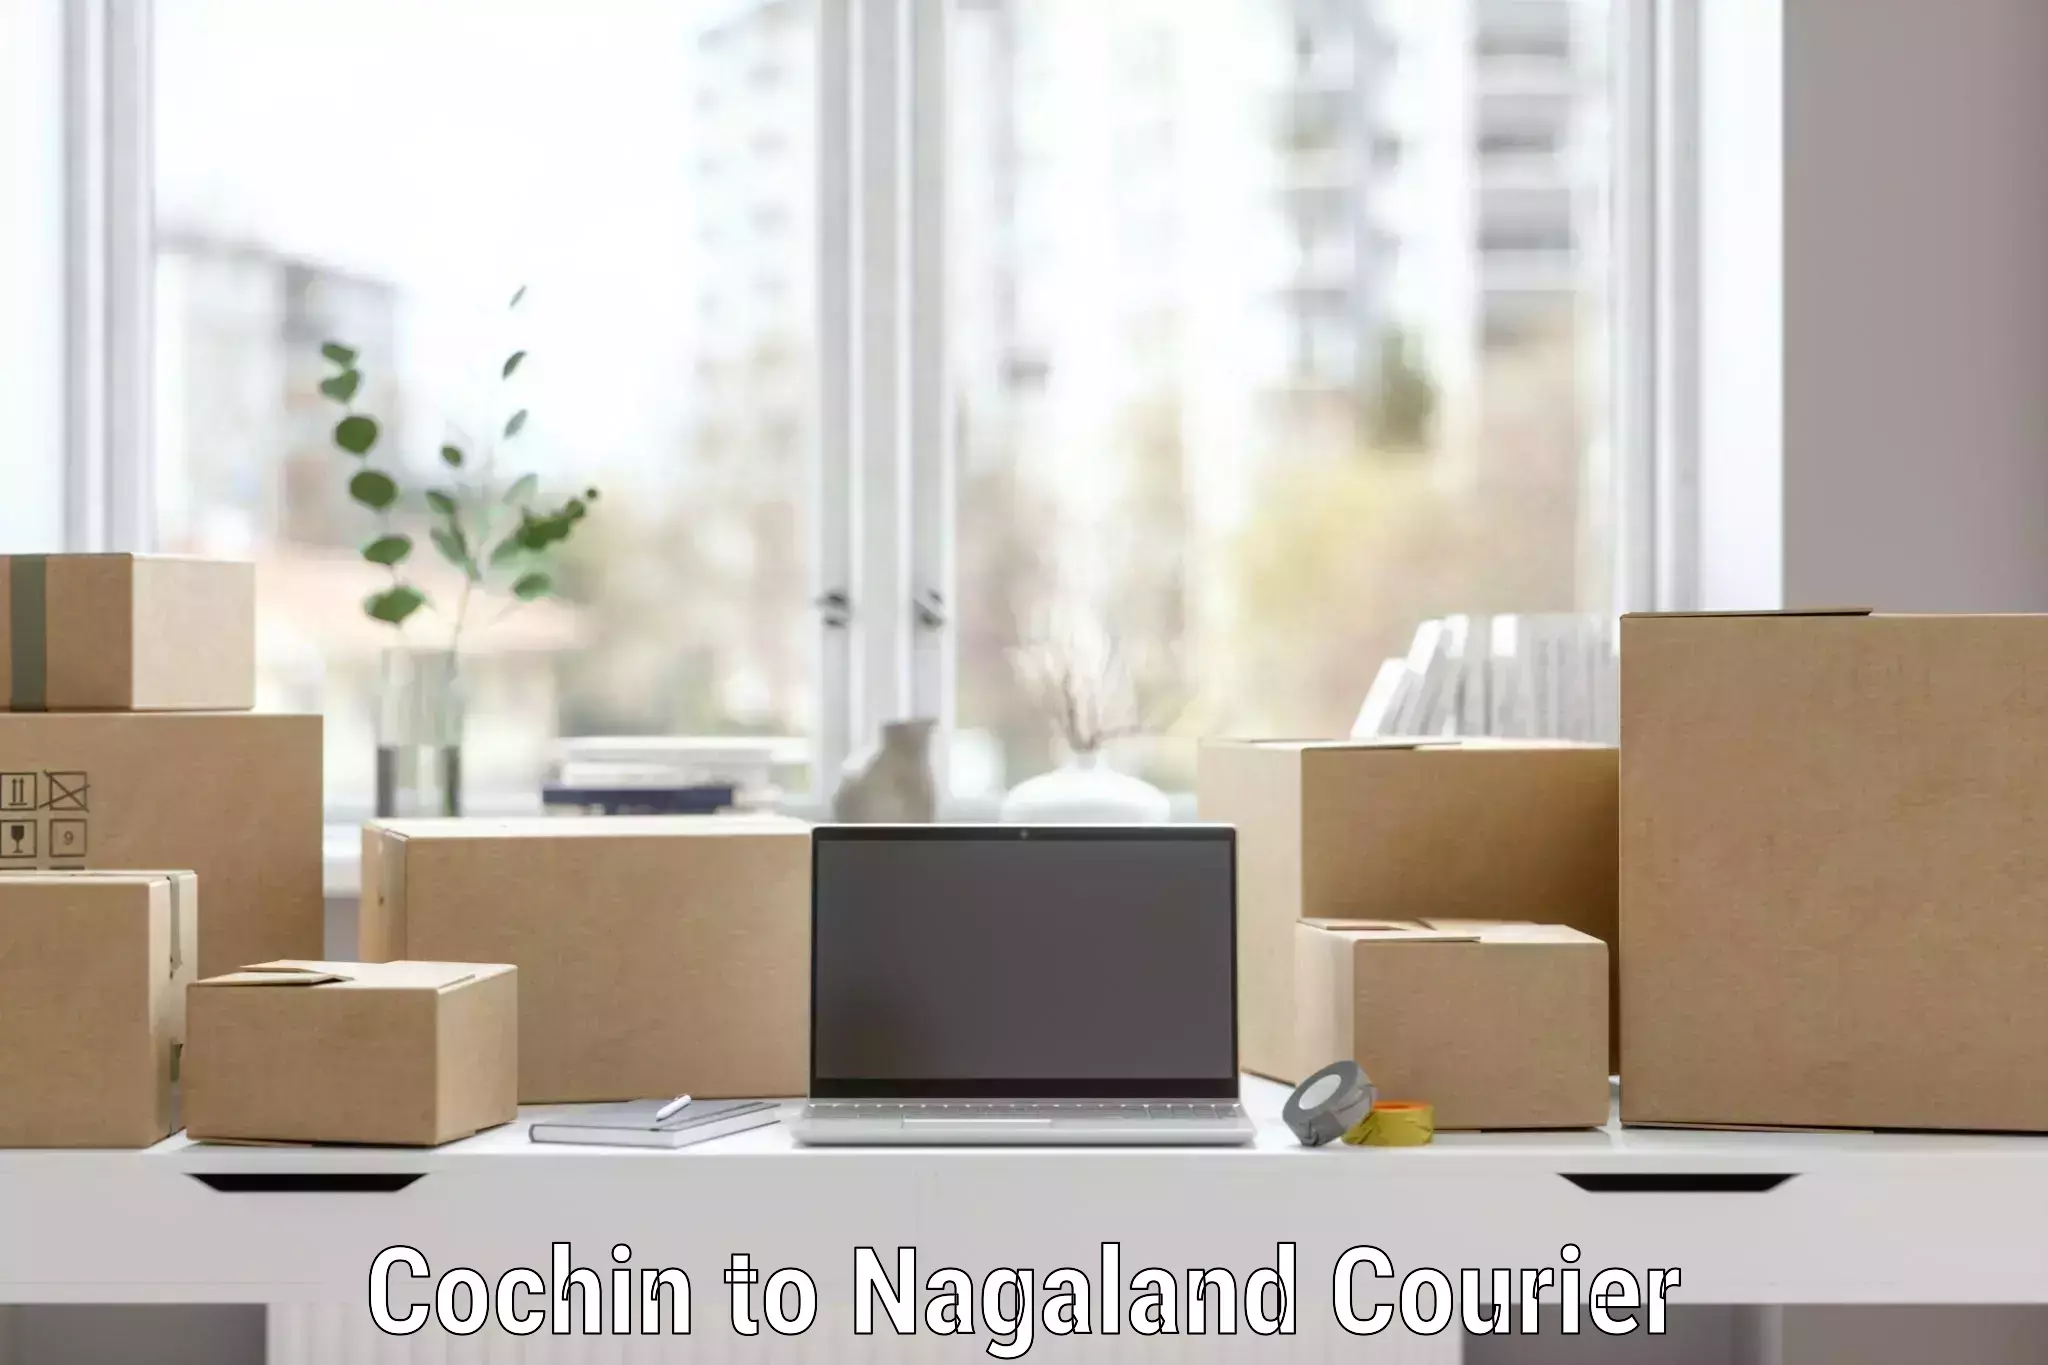 Budget-friendly movers Cochin to Nagaland